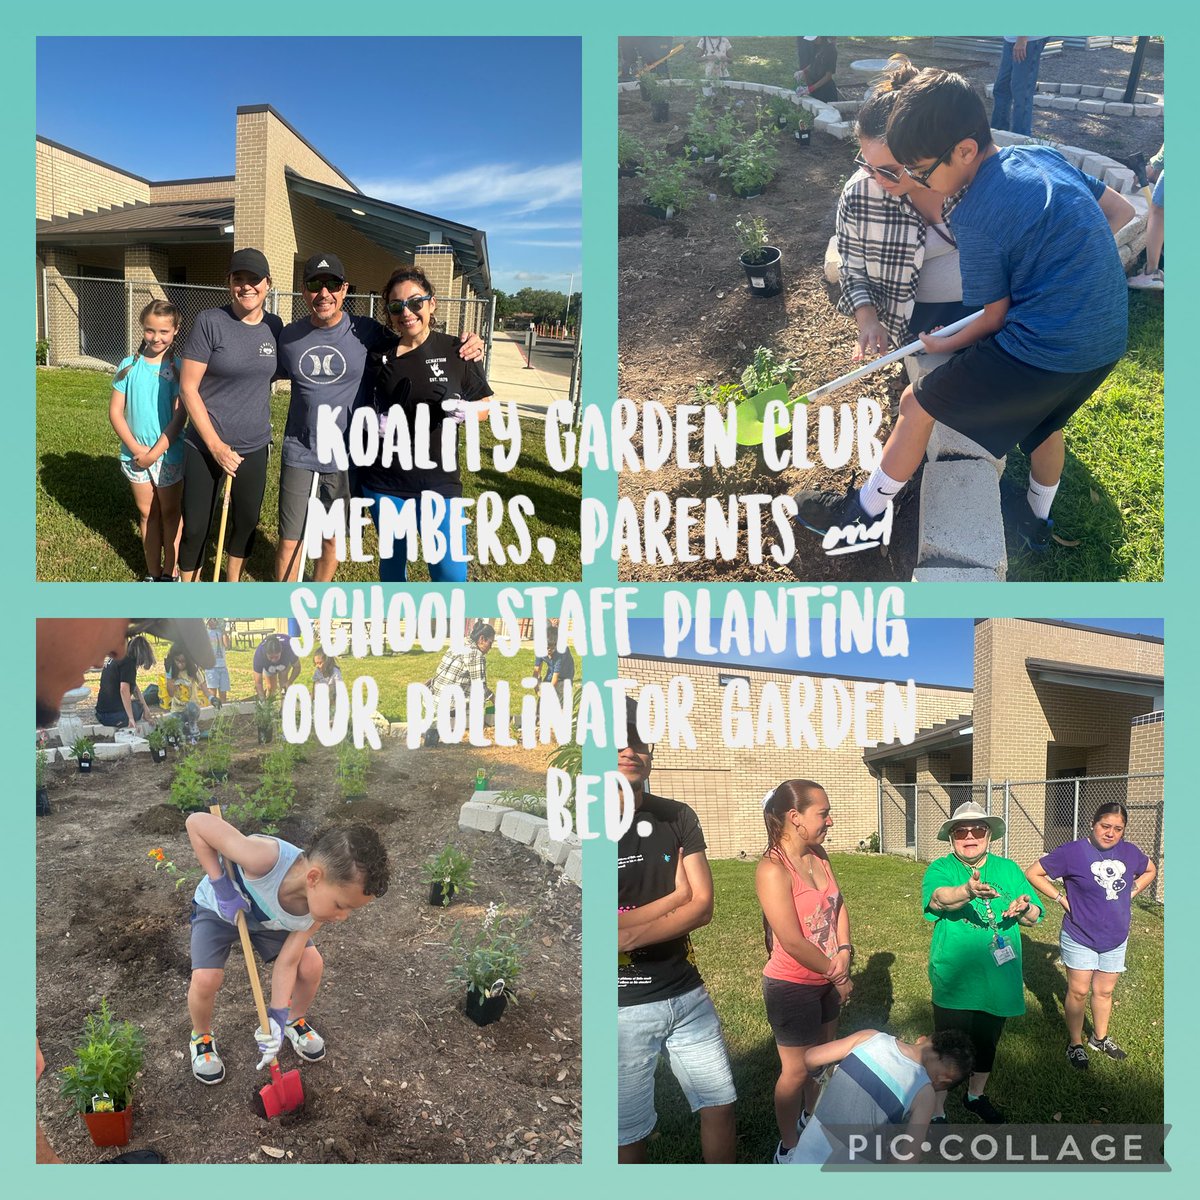 Koality Garden members, parents and school staff came to plant our pollinator garden from a grant we won from Project Acorn 👩🏻‍🌾⛲️! We are very grateful to Mr. Oberg for all the time and effort he has put into our garden beds!!